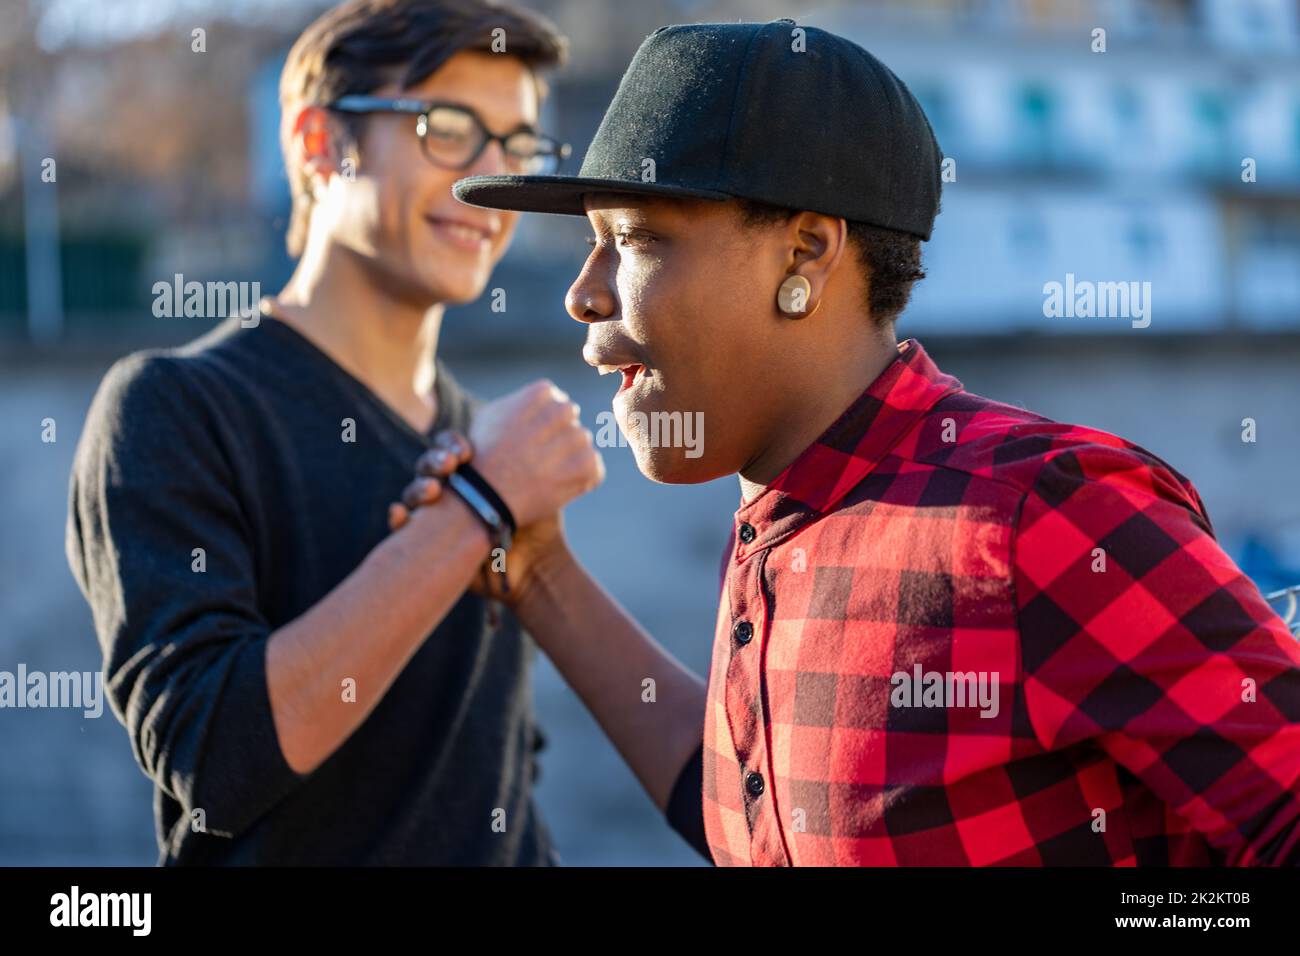 Two happy young men greeting each other in the street Stock Photo